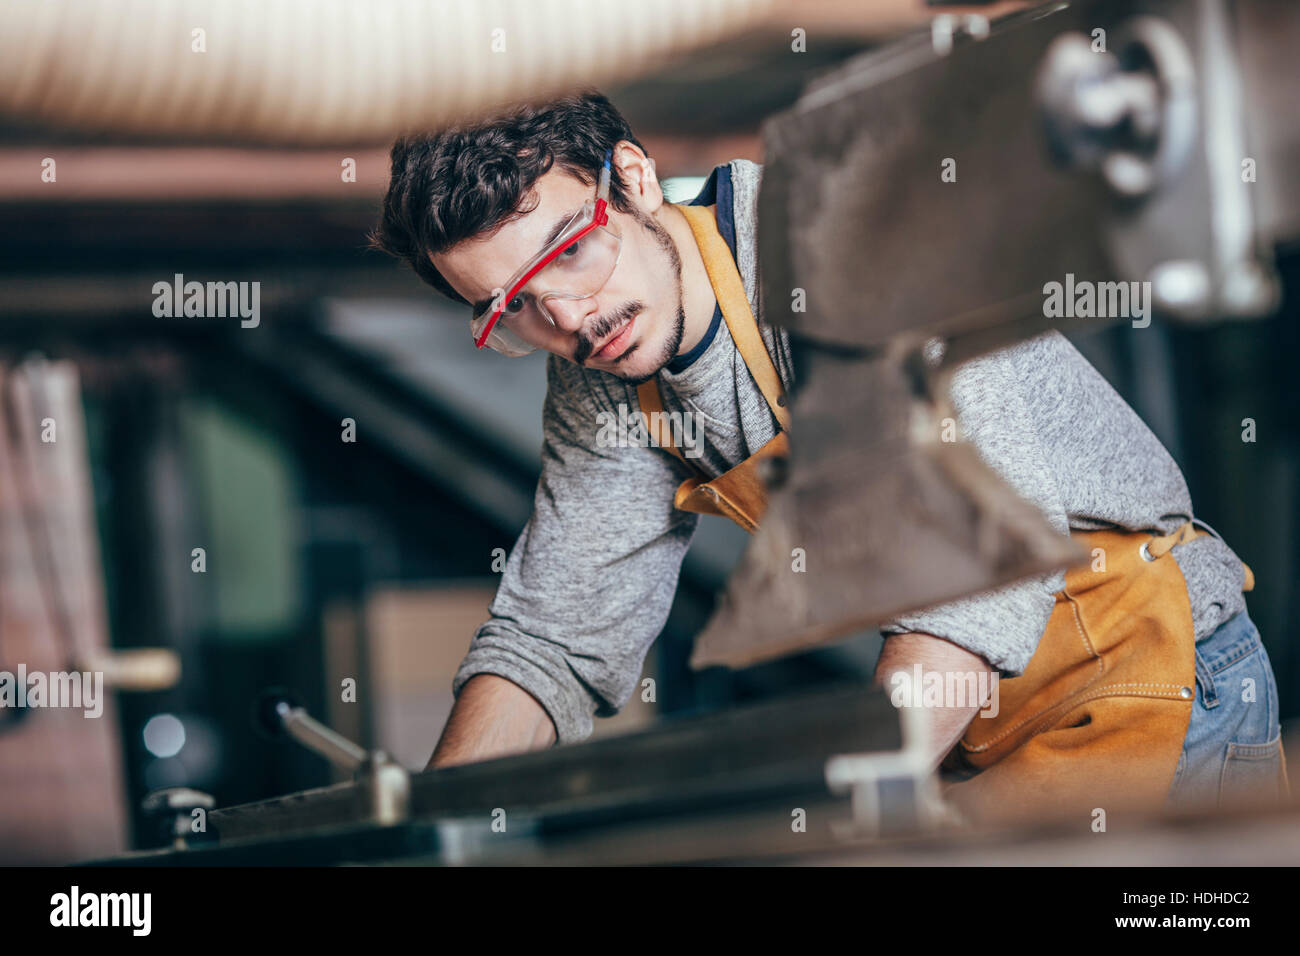 Carpenter using table saw at workshop Stock Photo